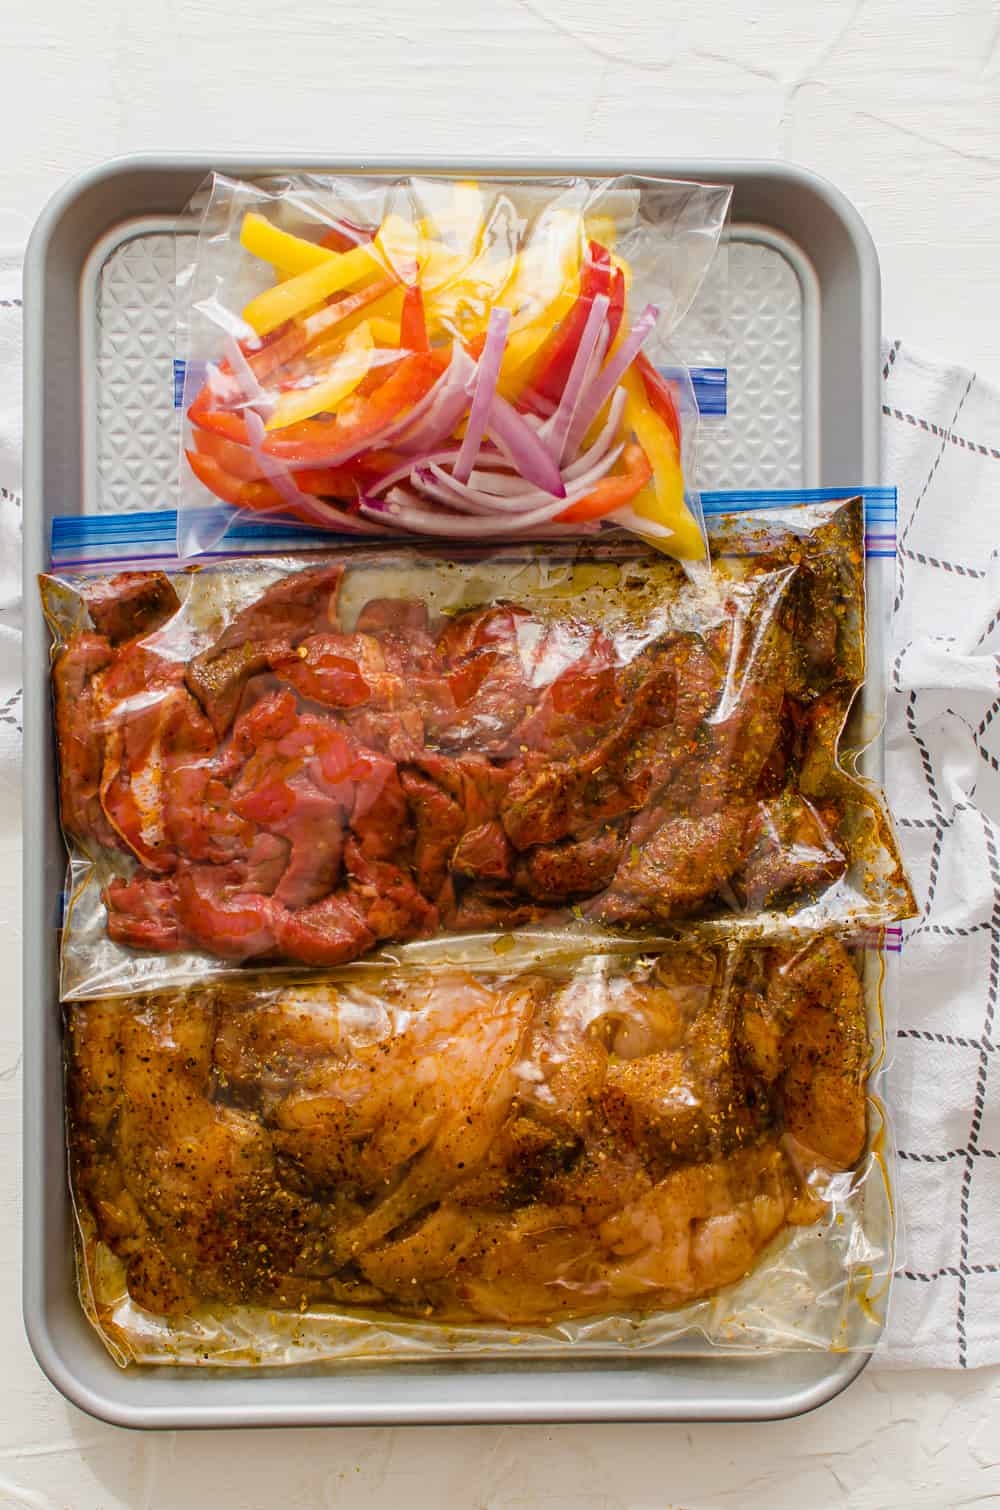 Fajita freezer meal kit with baggies of marinating chicken, marinating steak, and a third one with sliced peppers and onions.